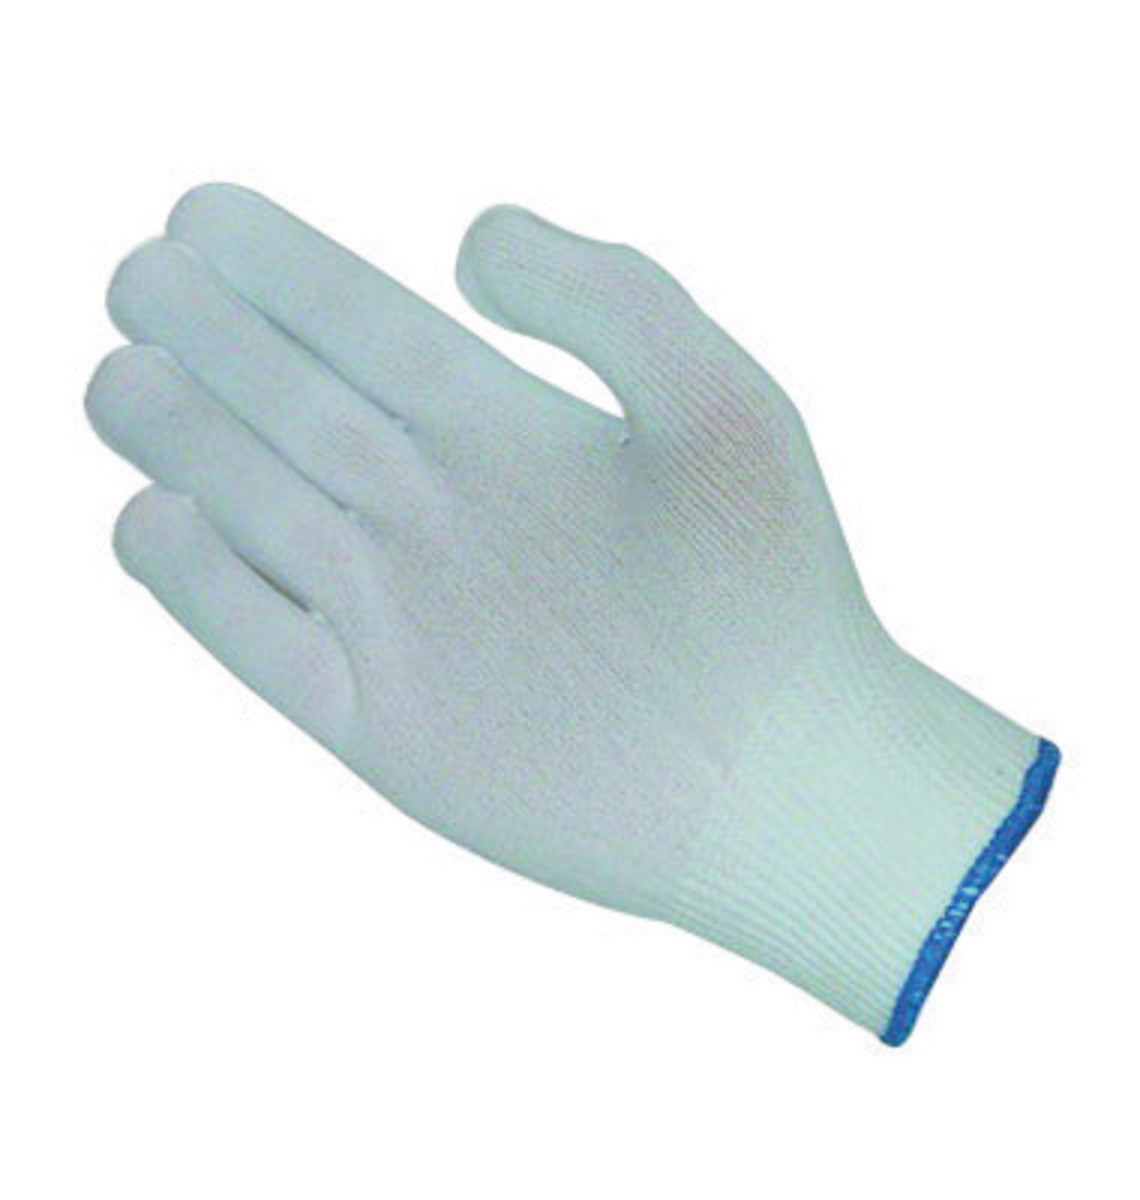 PIP® Large CleanTeam® Light Weight Carbon Fiber/Nylon Inspection Gloves With Hem Cuff